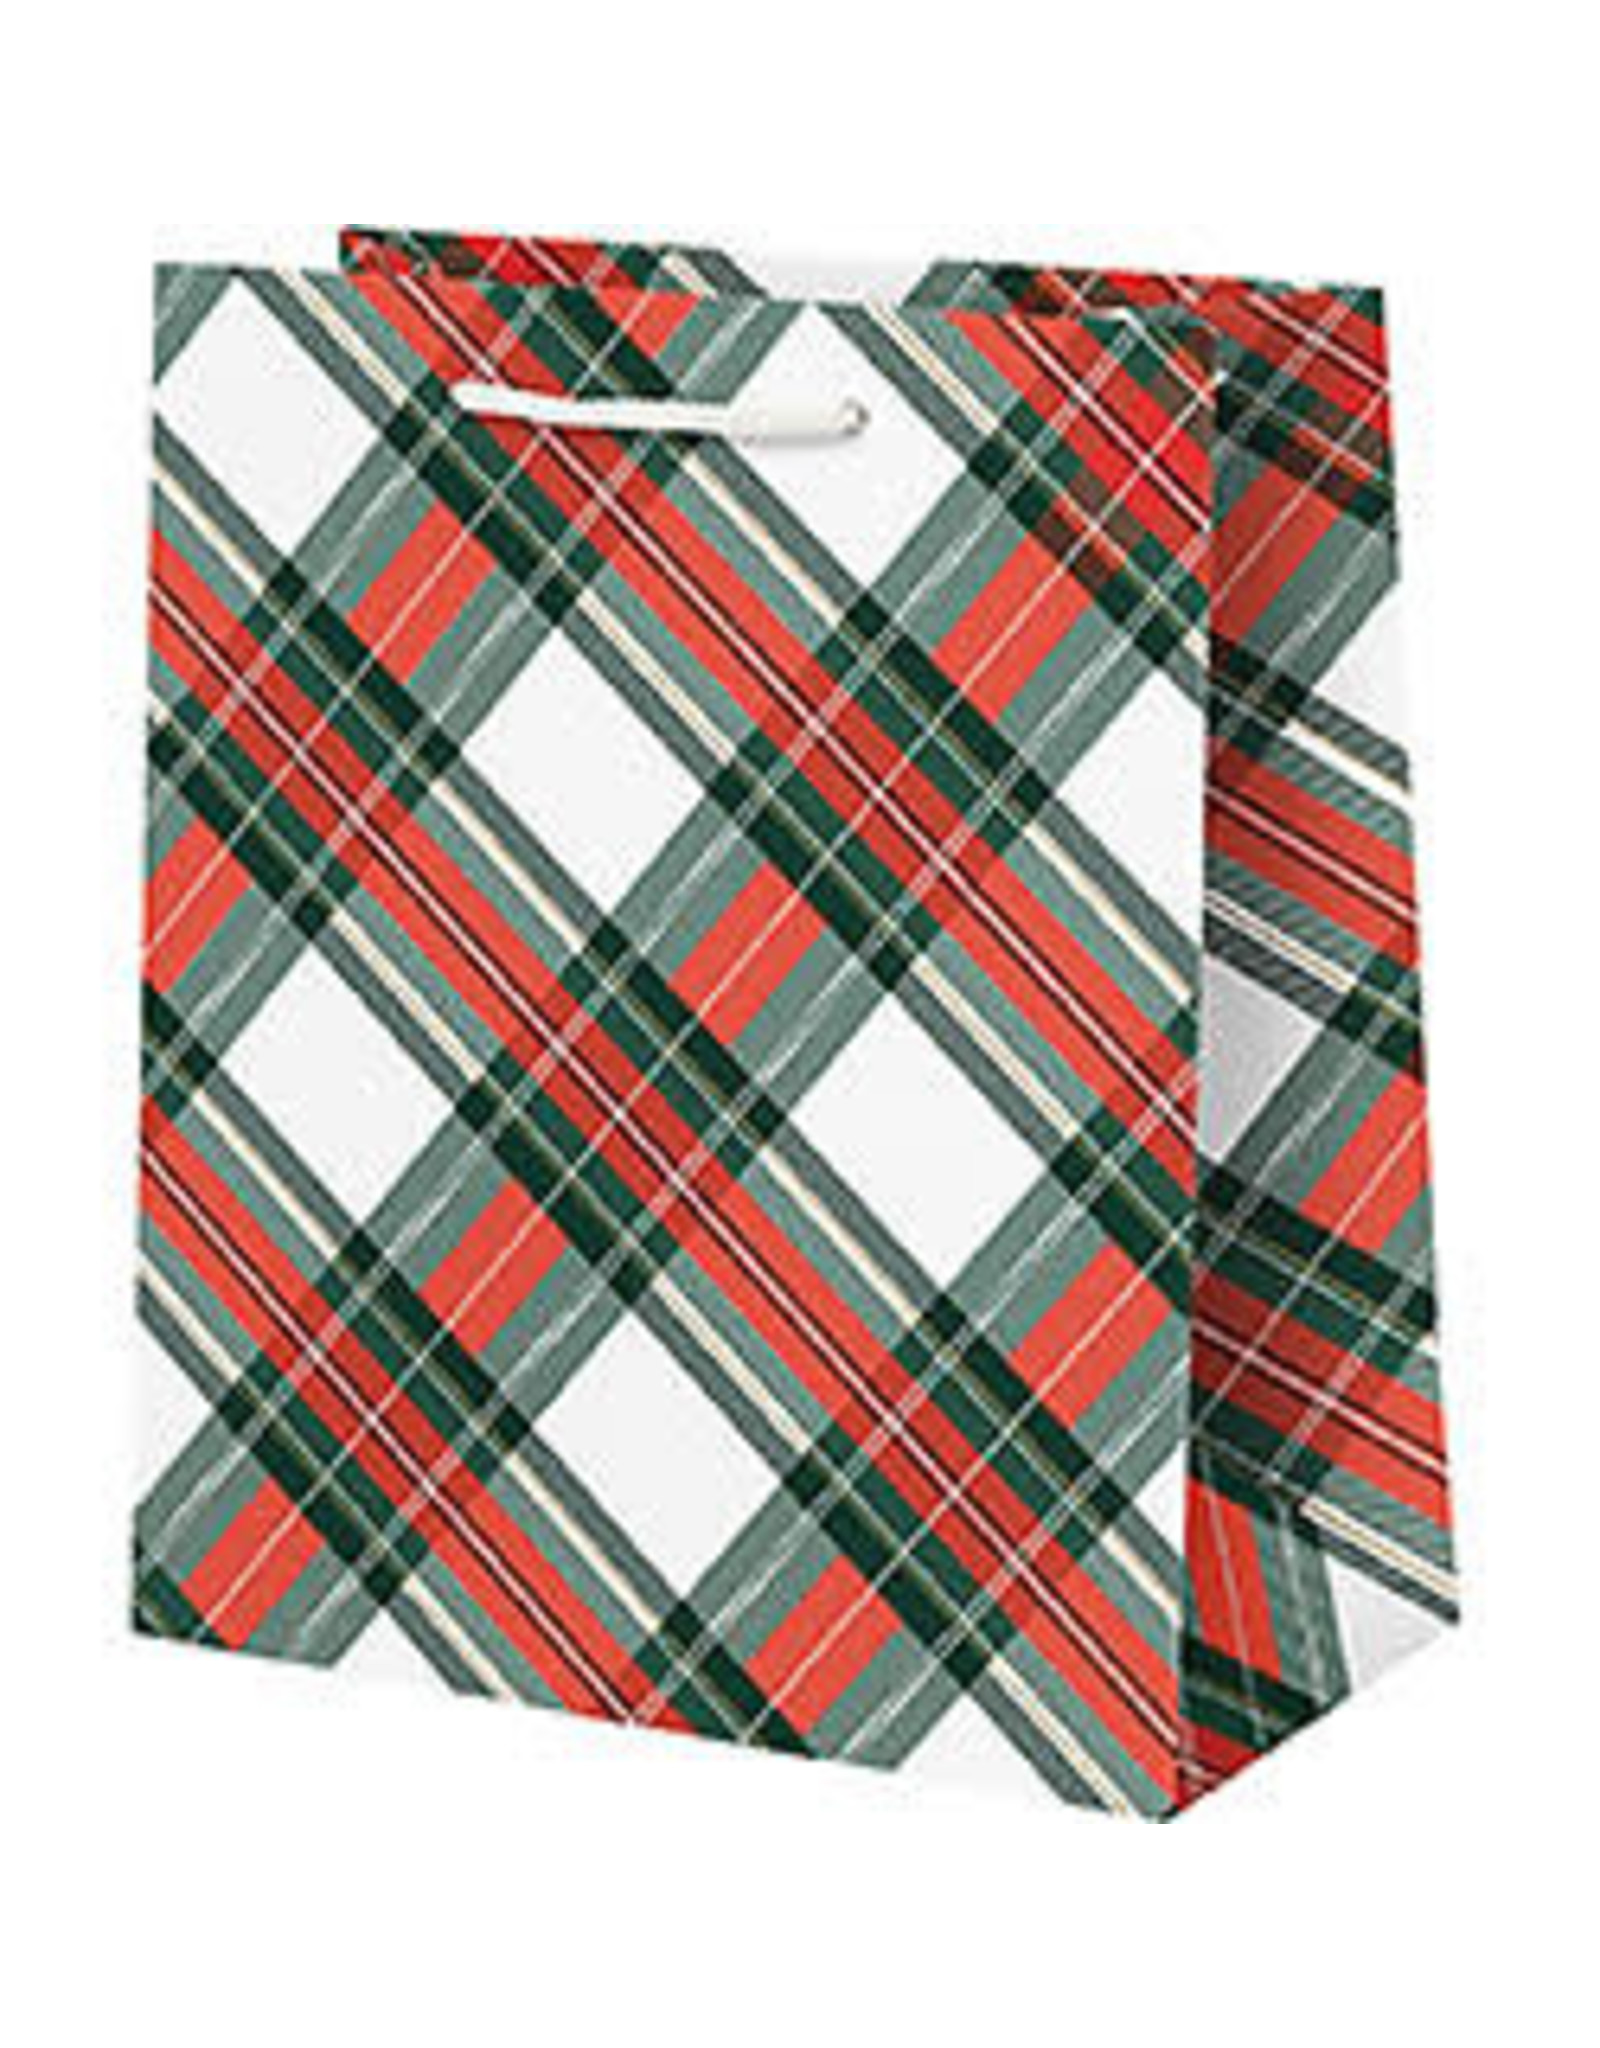 Waste Not Paper Medium Holiday Plaid with Foil Gift Bag